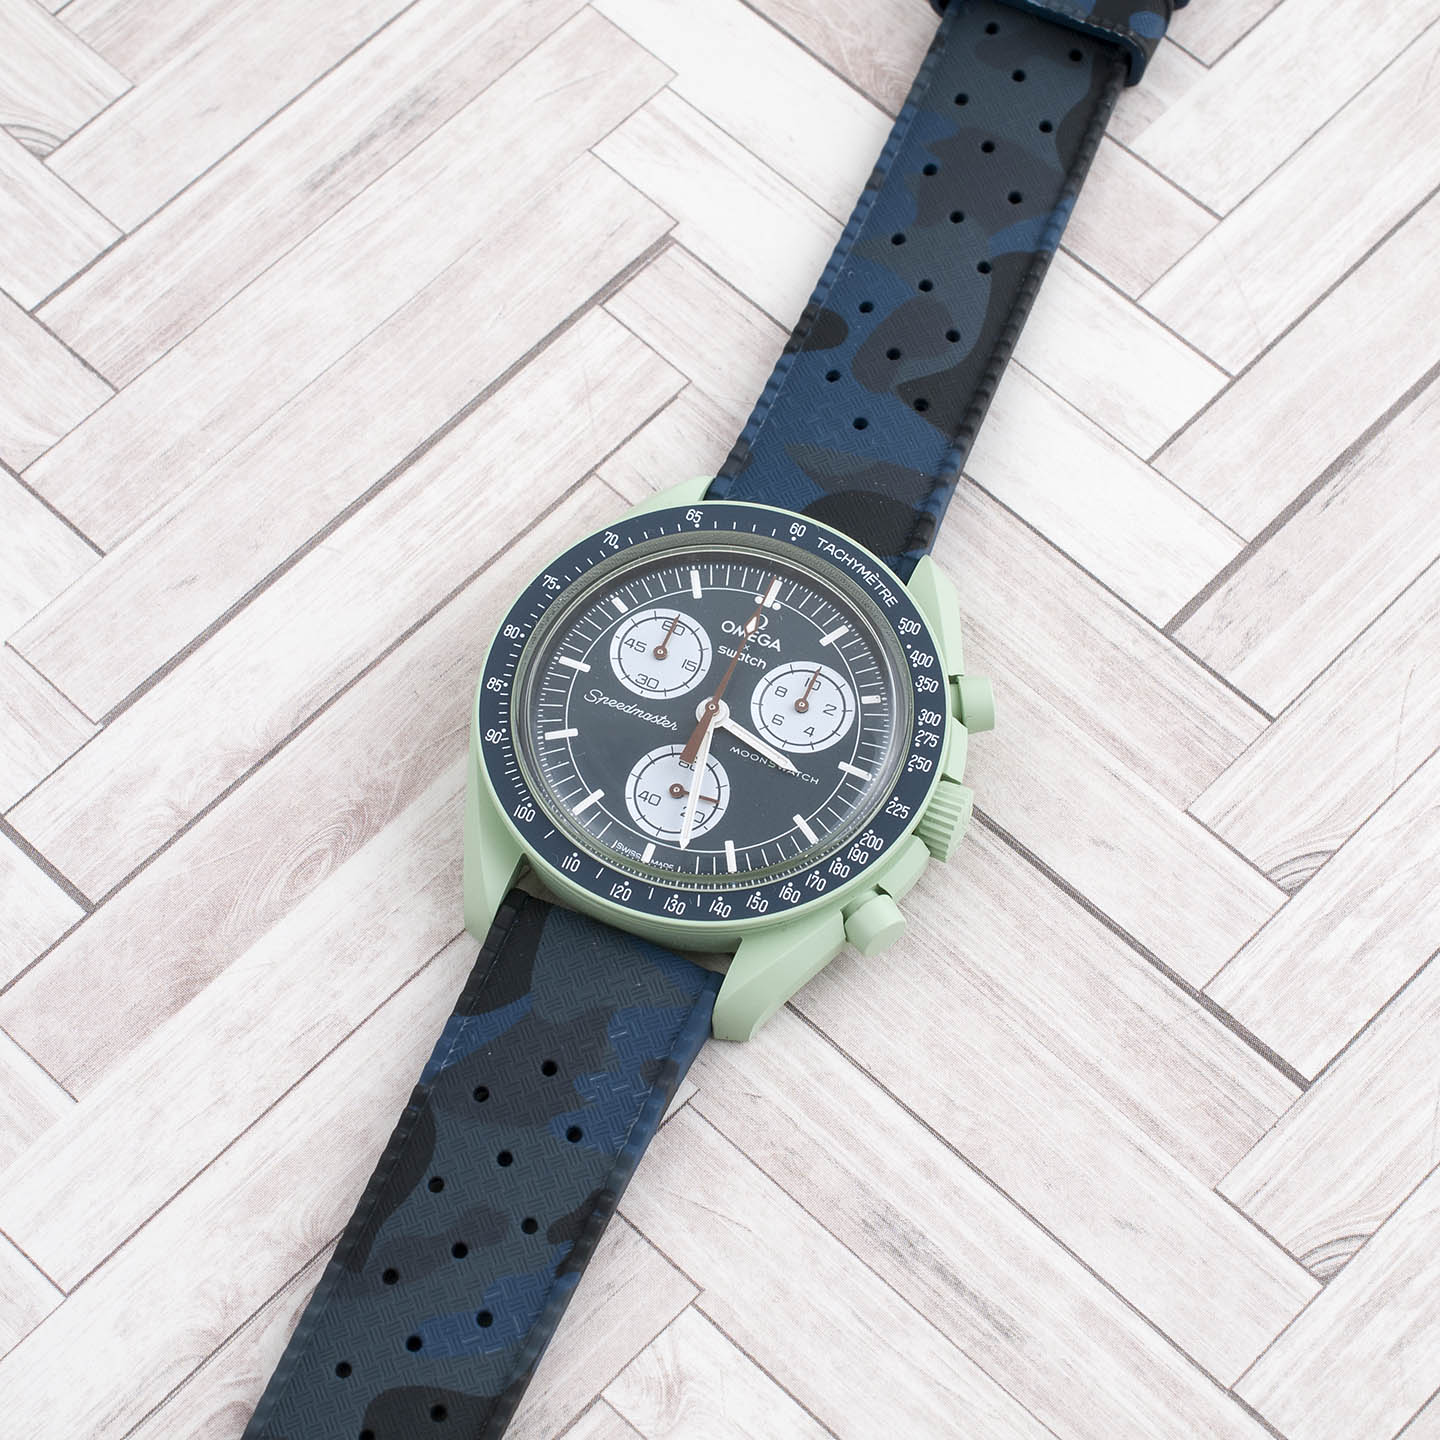 Tropical retro vintage replacement watch strap band FKM rubber tropic 19mm 20mm 21mm 22mm gray grey camo camouflage omega swatch moonswatch speedmaster mission to earth